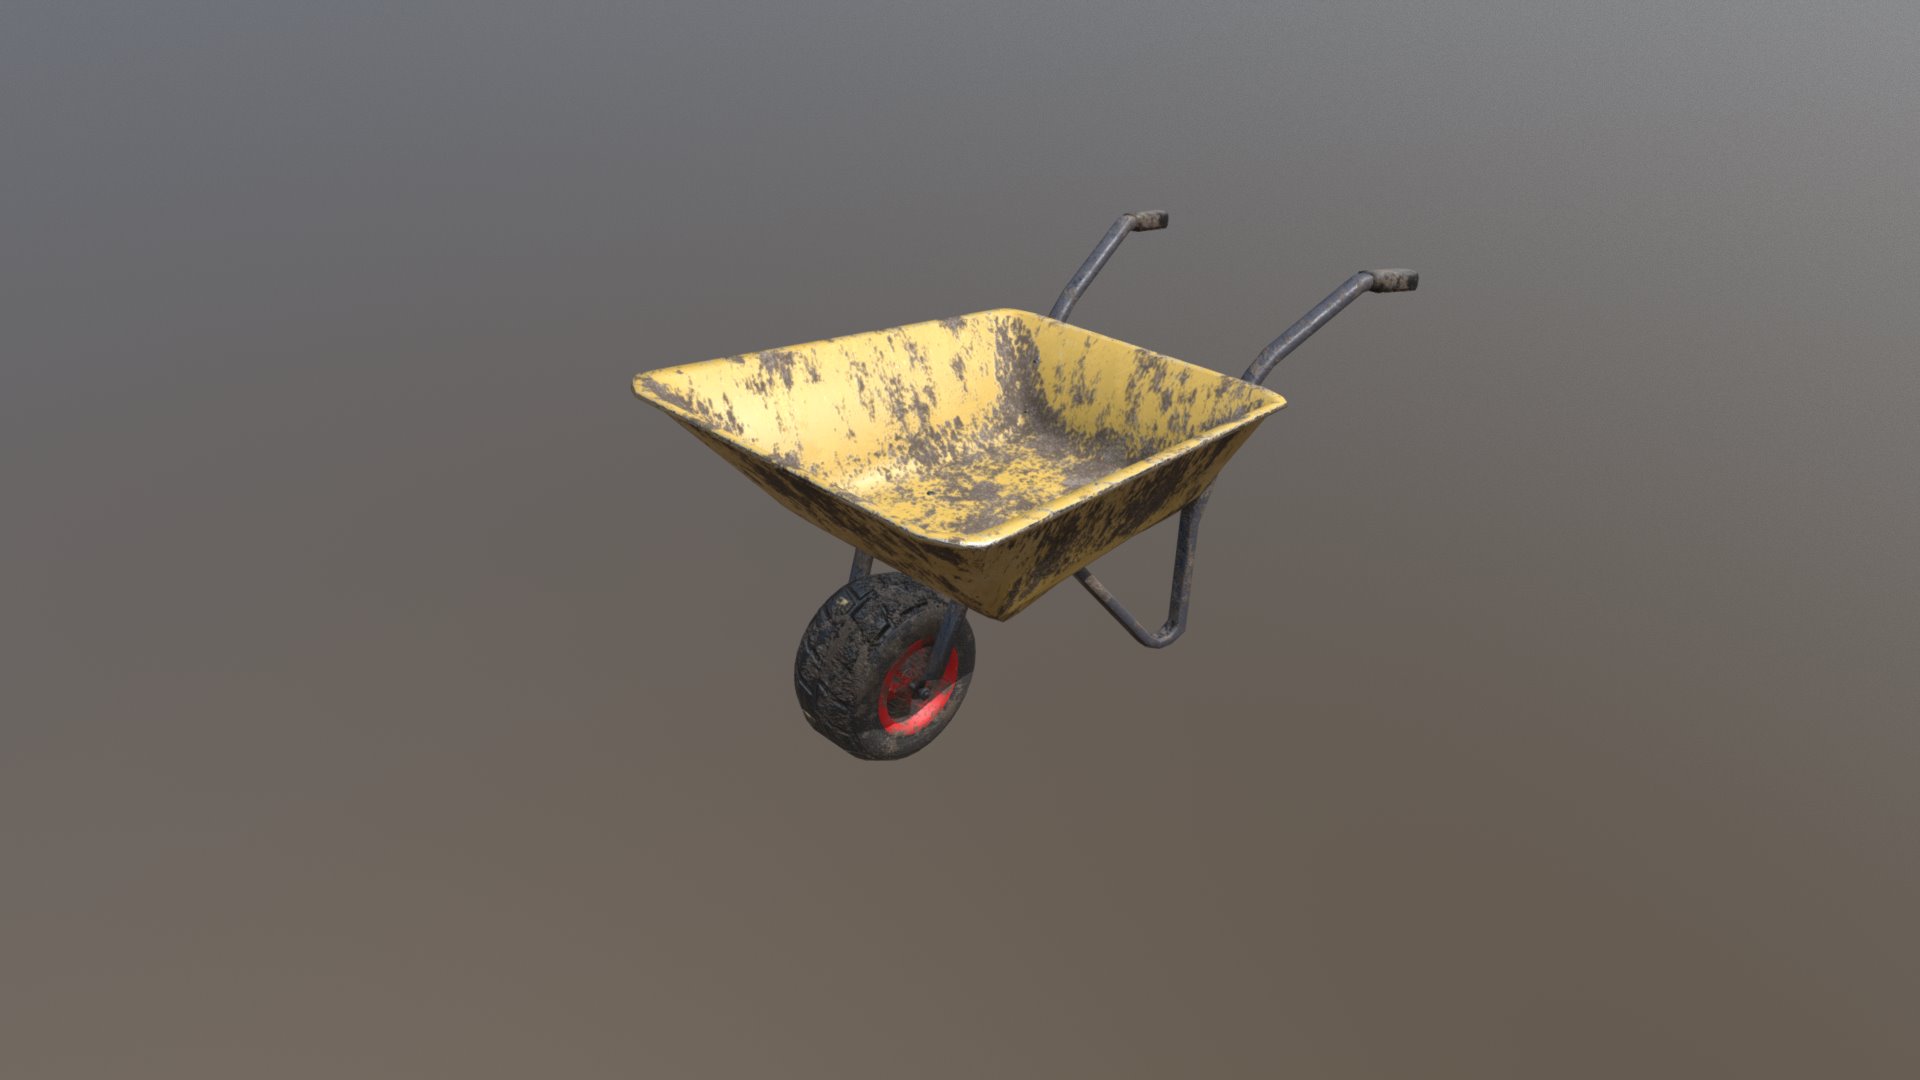 3D model Low Poly Dirty Wheelbarrow Yellow - This is a 3D model of the Low Poly Dirty Wheelbarrow Yellow. The 3D model is about a yellow and black skateboard.